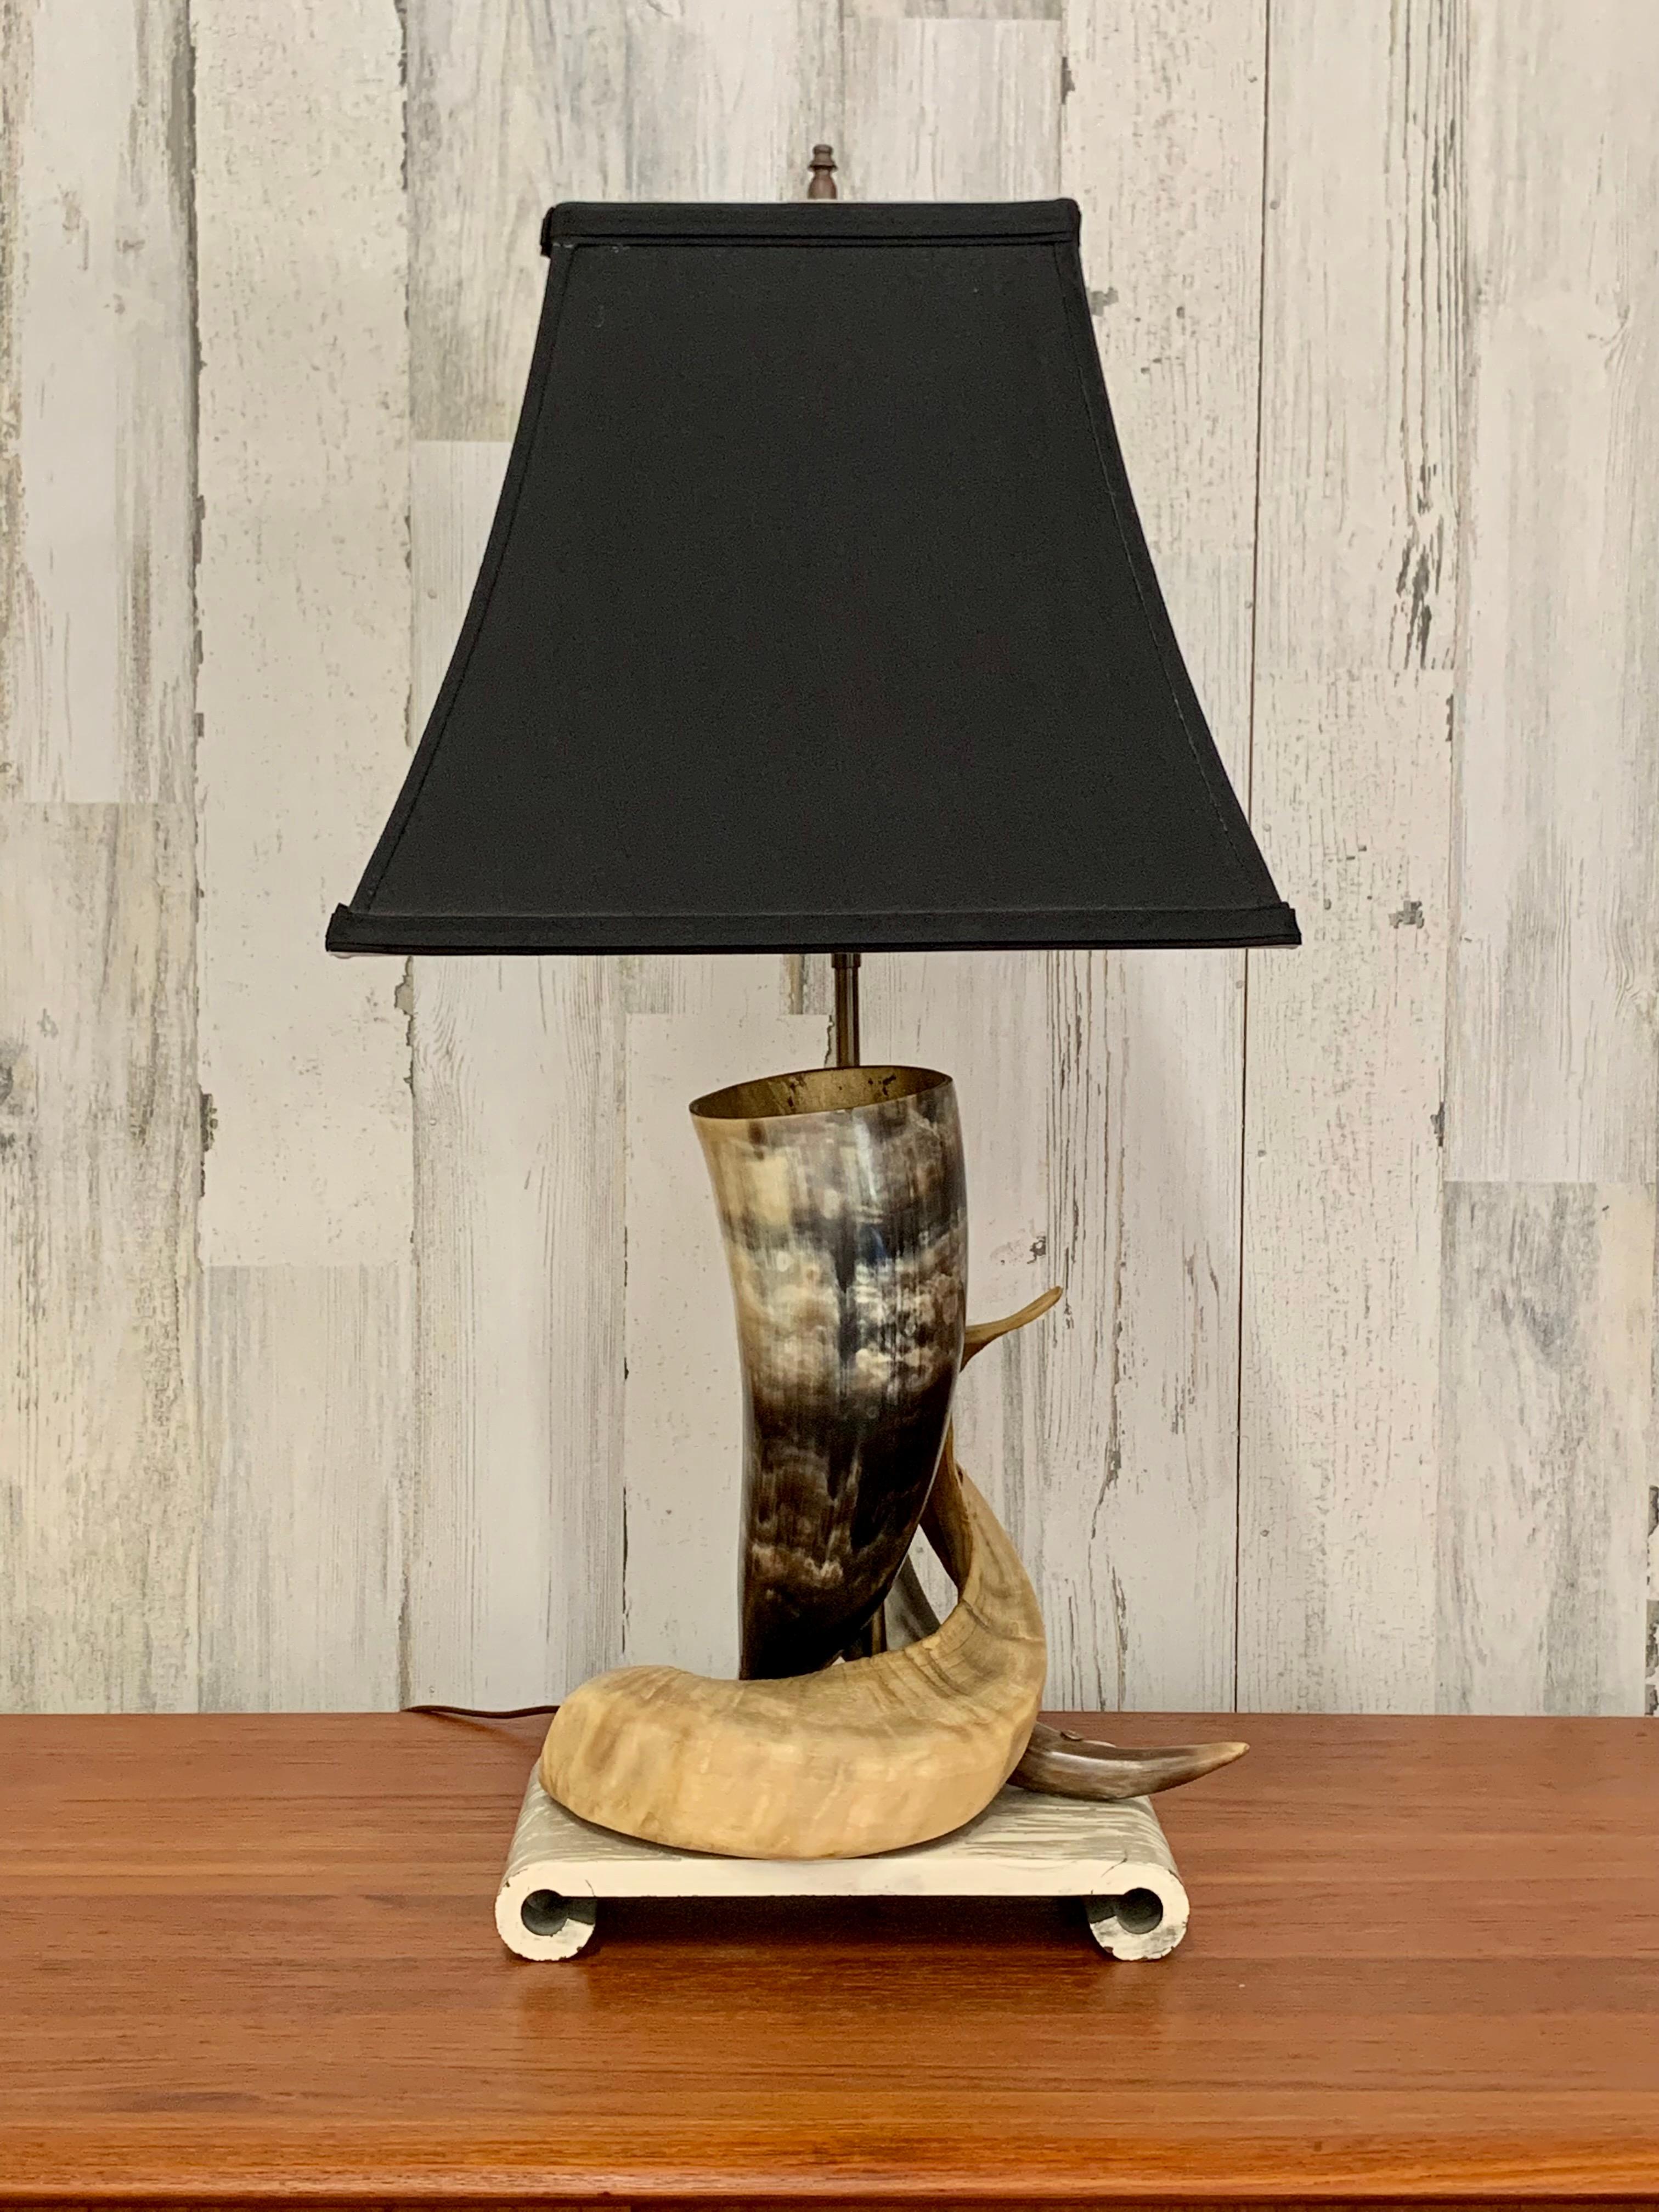 Decorative steer horn table lamp with faux marble base.